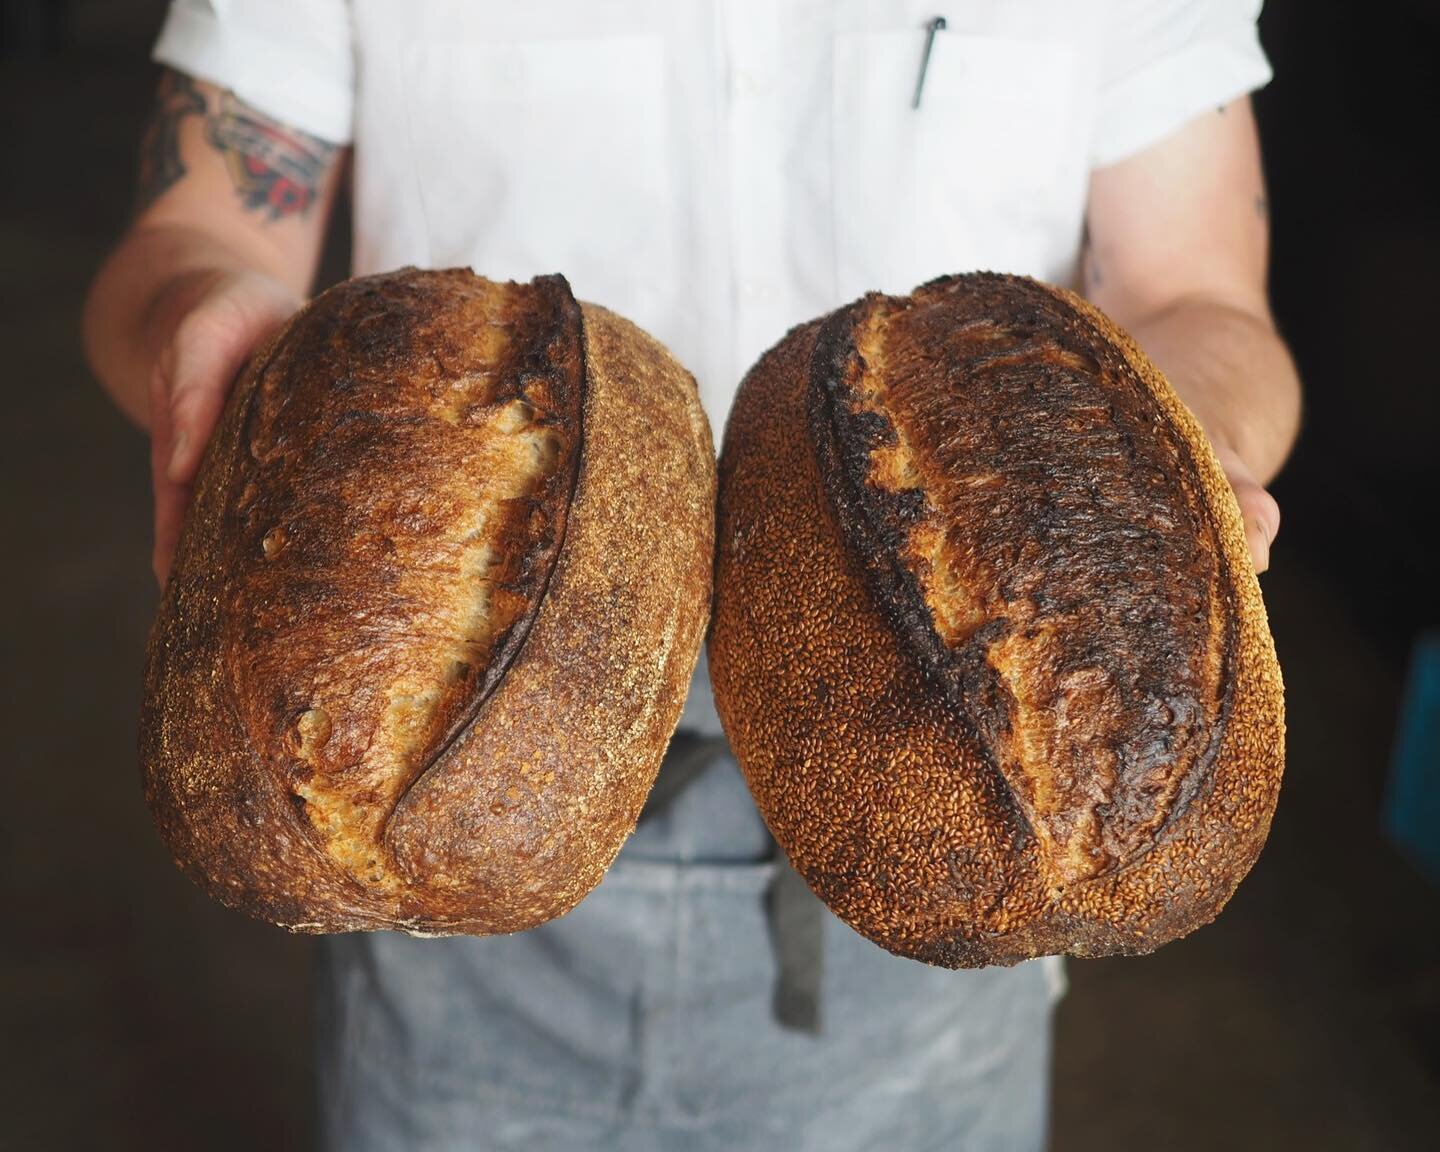 We put a lot of time, thought, and love into our bread. We&rsquo;re proud to feature it all over our menu from morning to night. You can also come get loaves to take home to make your own toast or sandwich dreams come true.